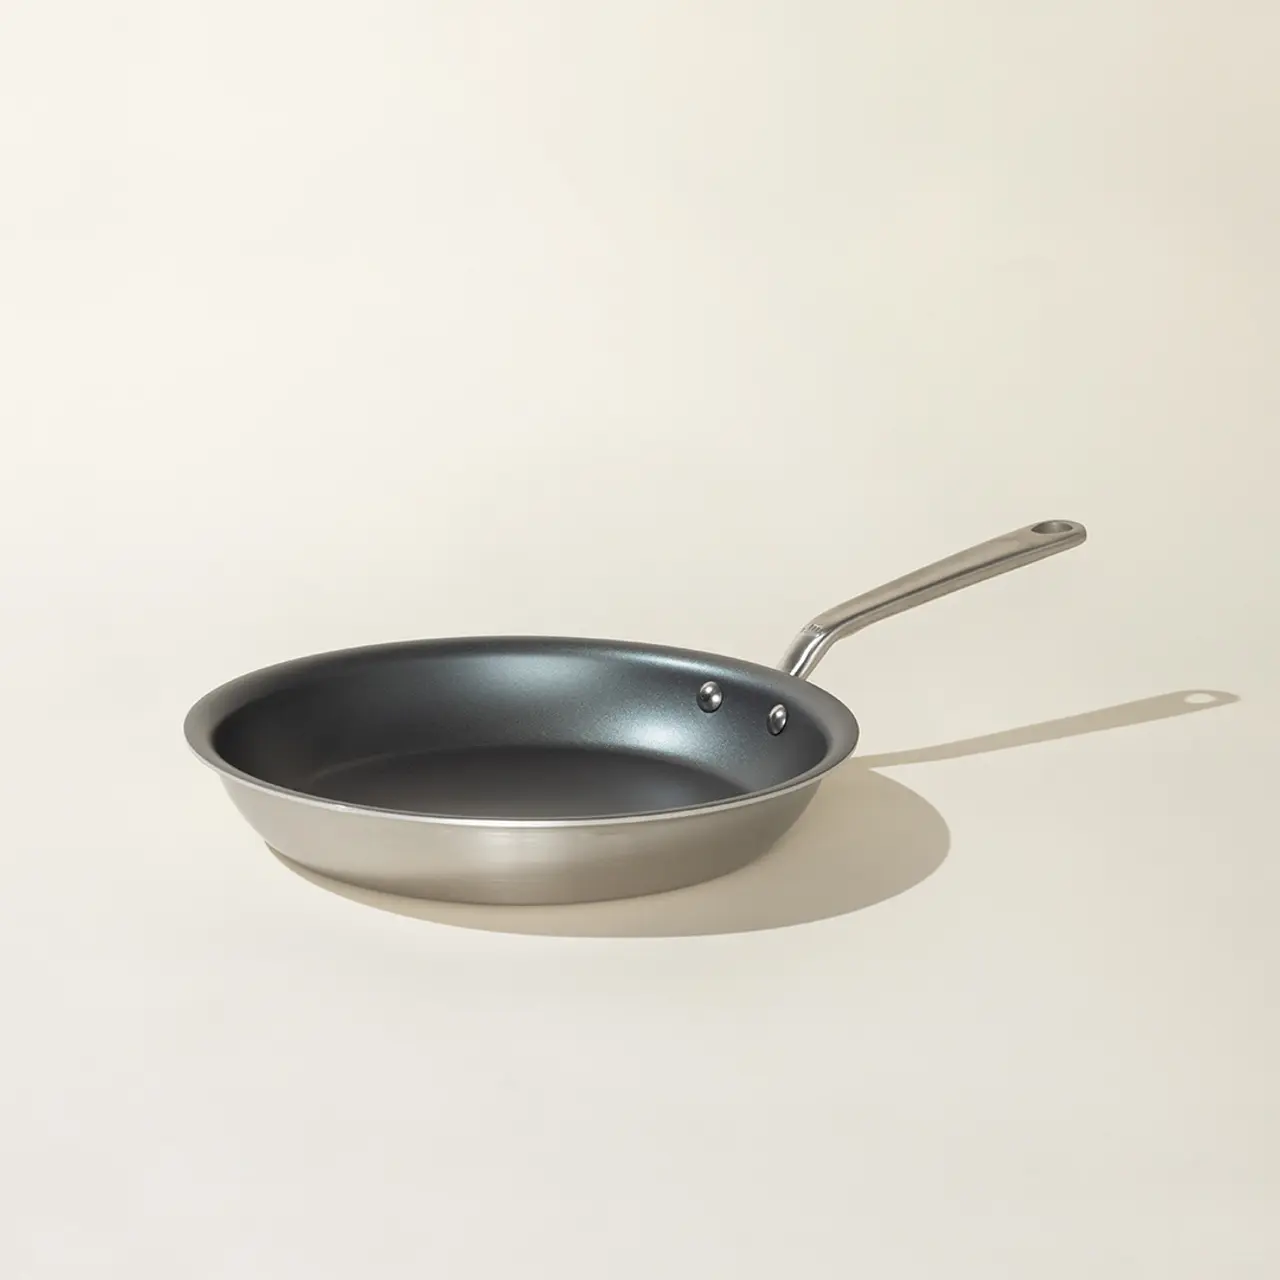 A silver-colored frying pan with a long handle is centered on a light background.